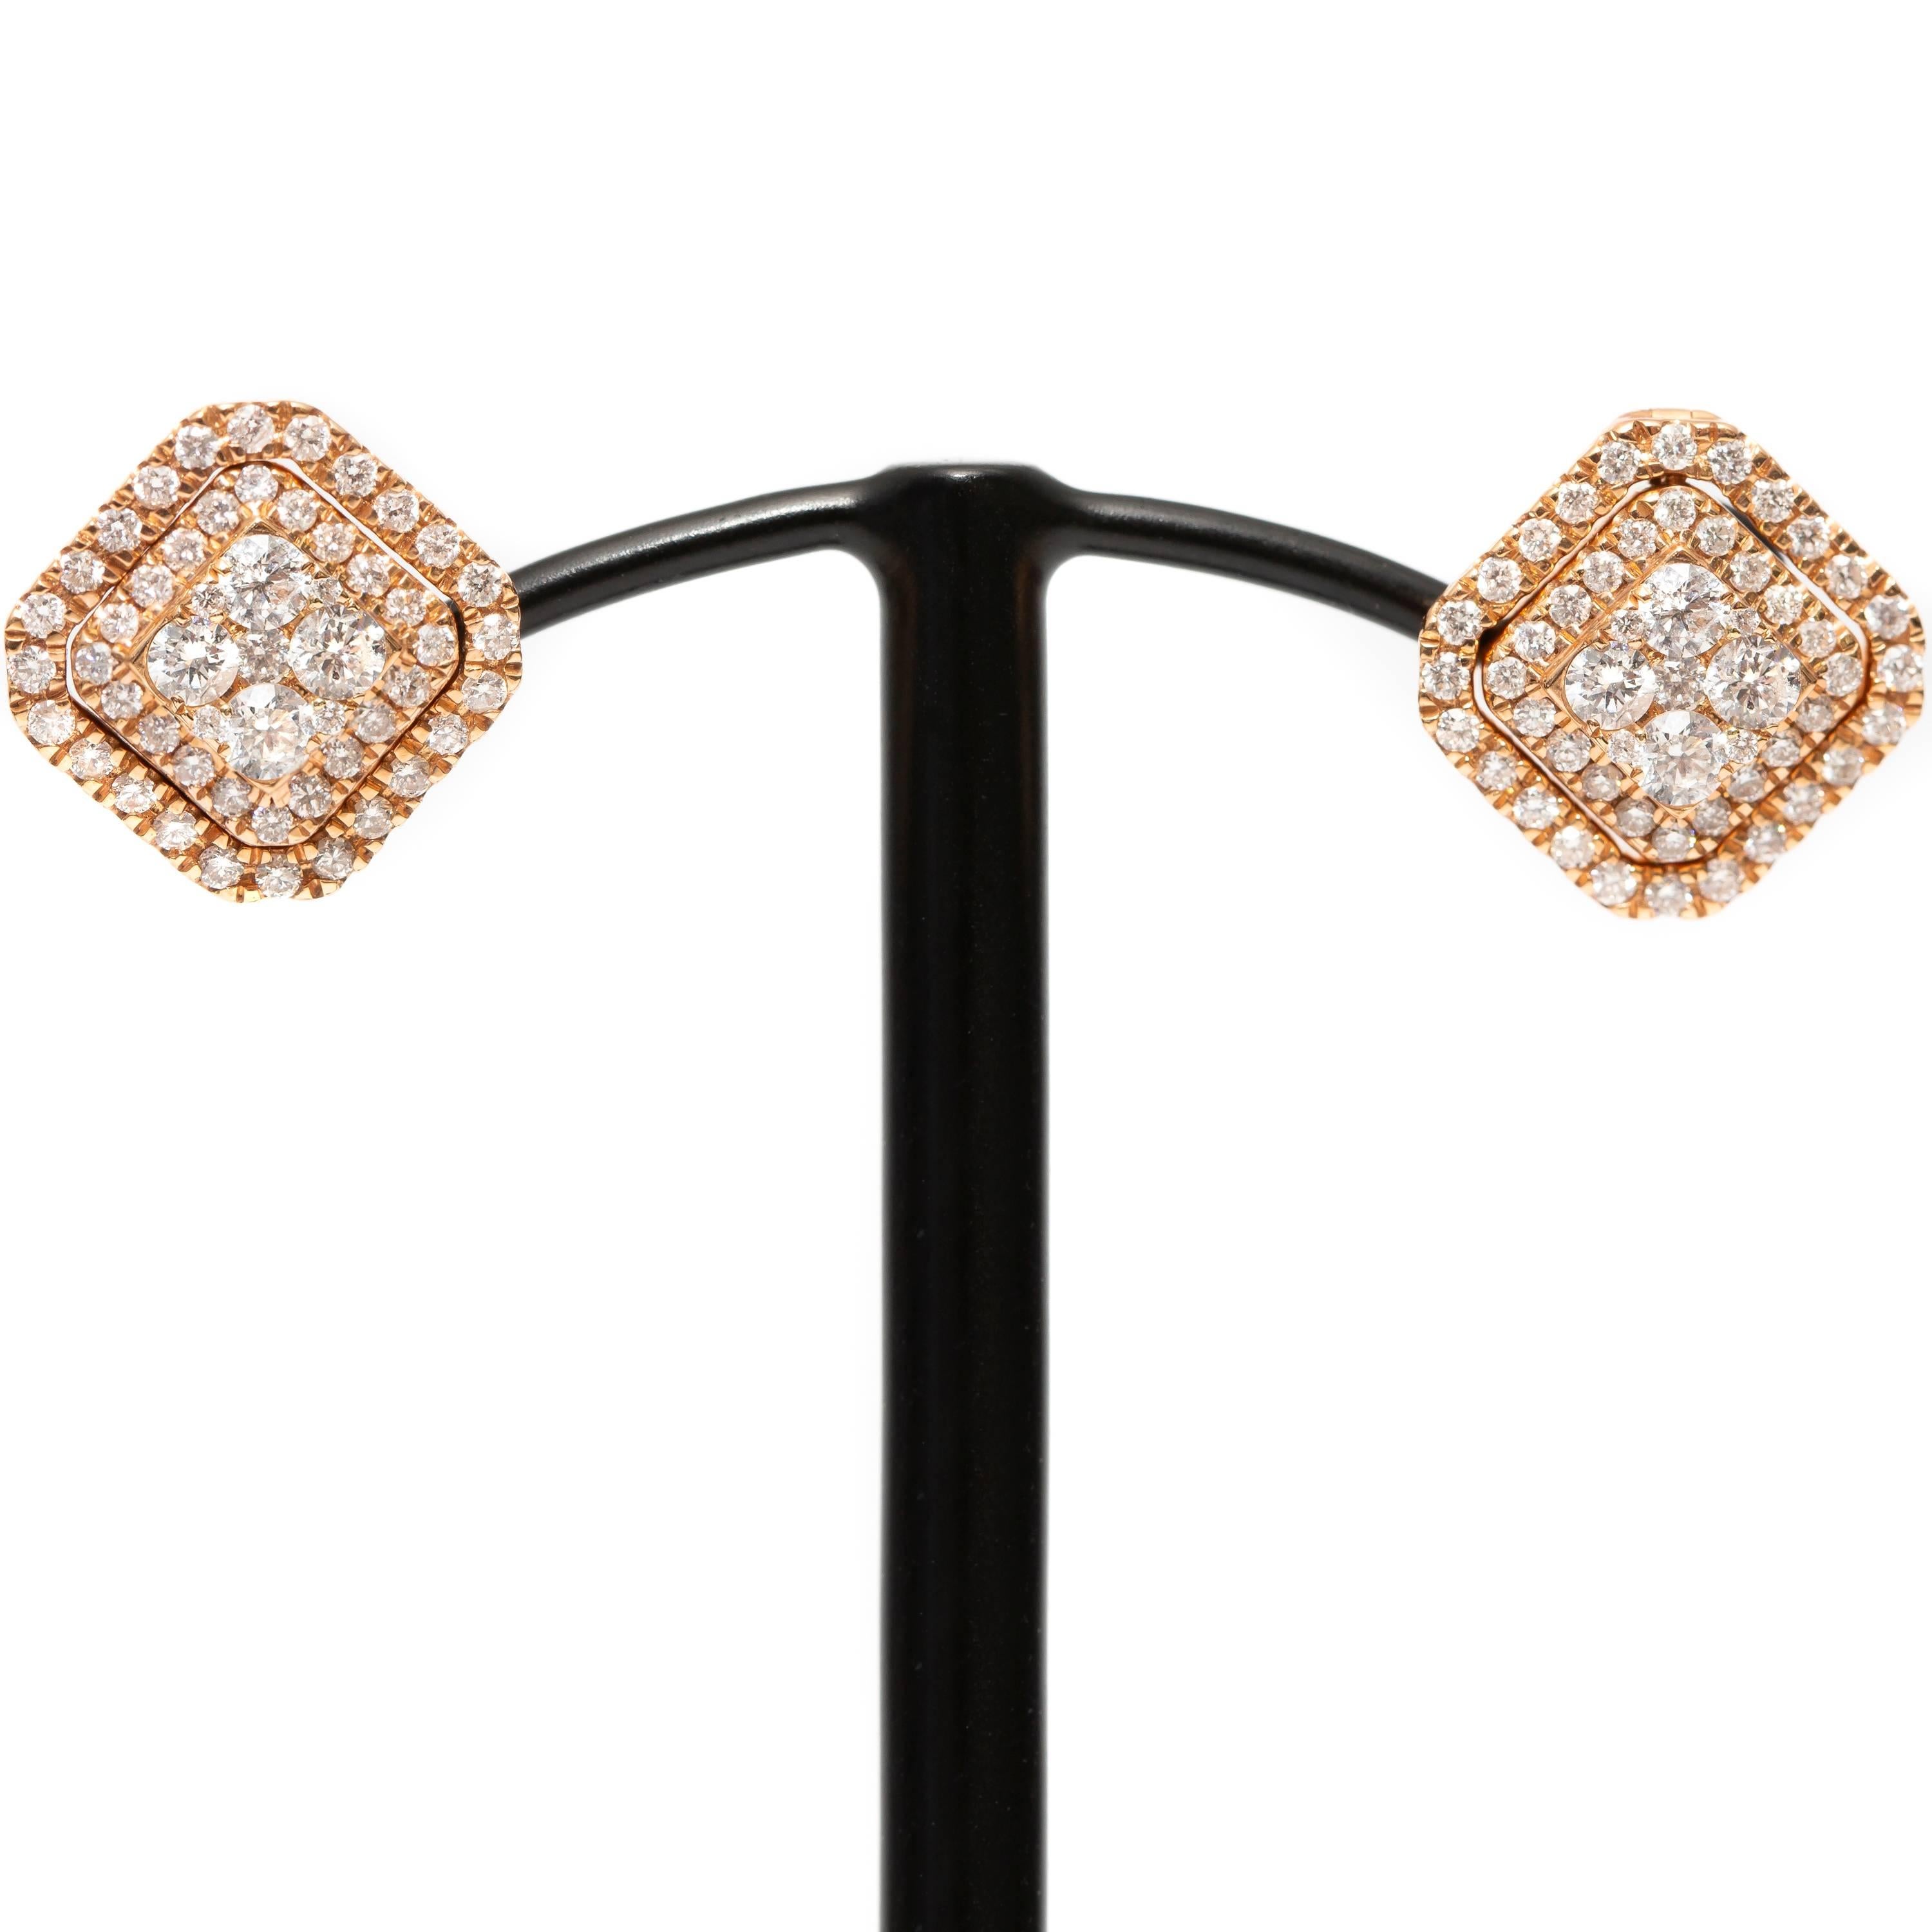 Geometric multi-wear Earrings in 18 Karat Rose Gold are a fashionable update to the classic circular style, can be worn as studs, double halo and drops. Set with an abundant 0.90 Carat of Glittering color H clarity SI Round Brilliant White Diamonds